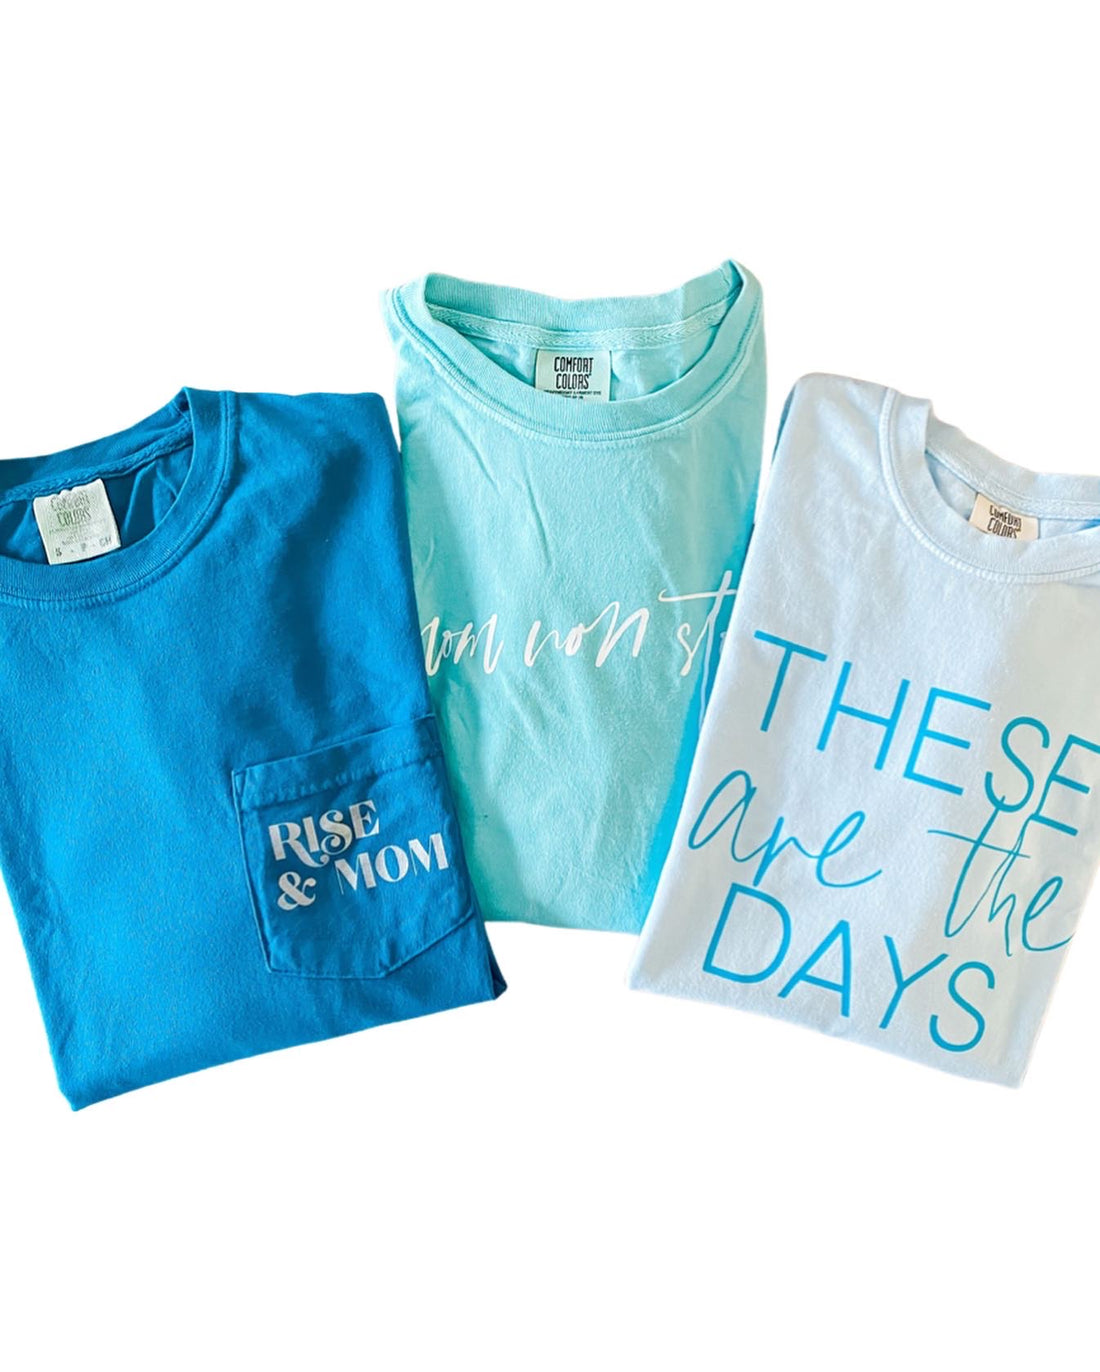 These are The Days - Sadie Long Sleeve (SM only)